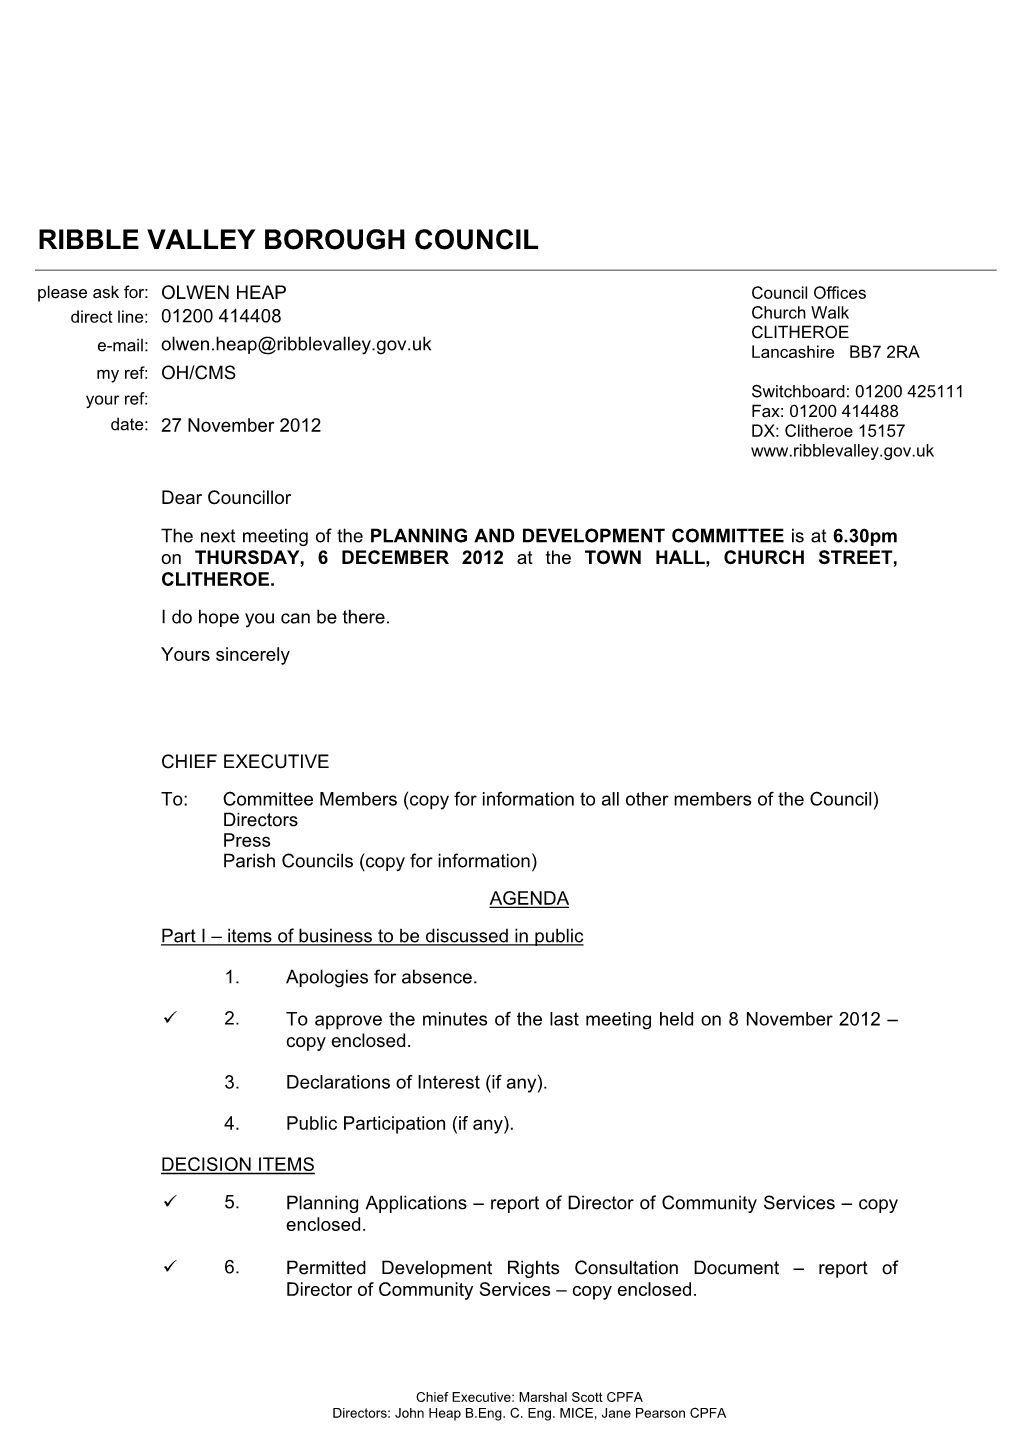 PLANNING and DEVELOPMENT COMMITTEE Agenda Item No Meeting Date: THURSDAY, 6 DECEMBER 2012 Title: PLANNING APPLICATIONS Submitted By: DIRECTOR of COMMUNITY SERVICES